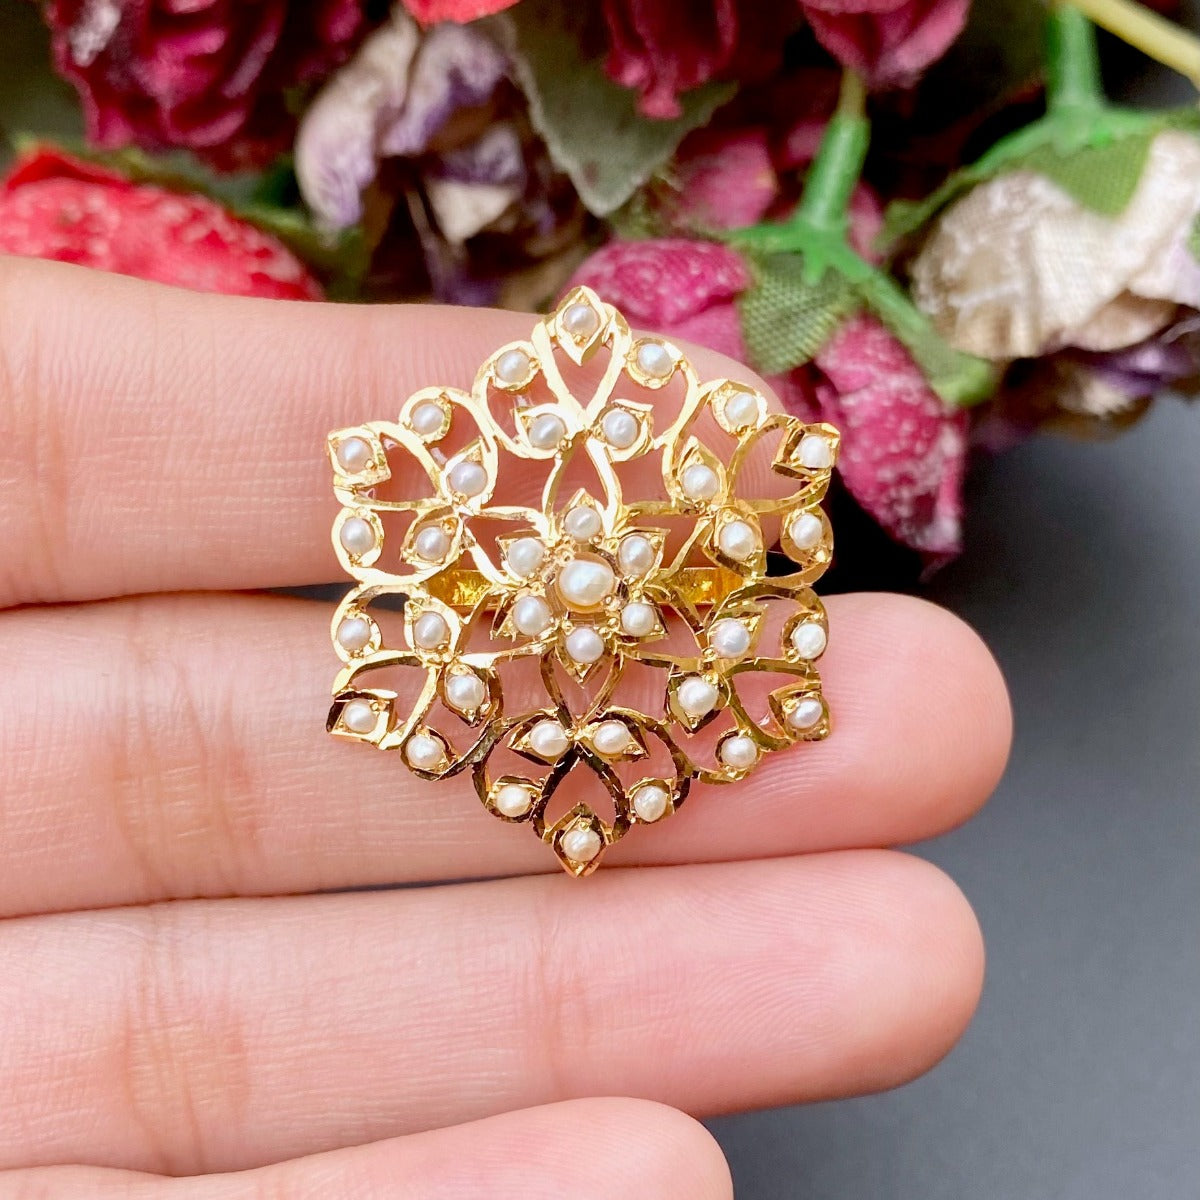 Floral Gold Ring in 22ct Gold Studded with Pearls using Traditional Jadau Jewelry Technique GLR 047